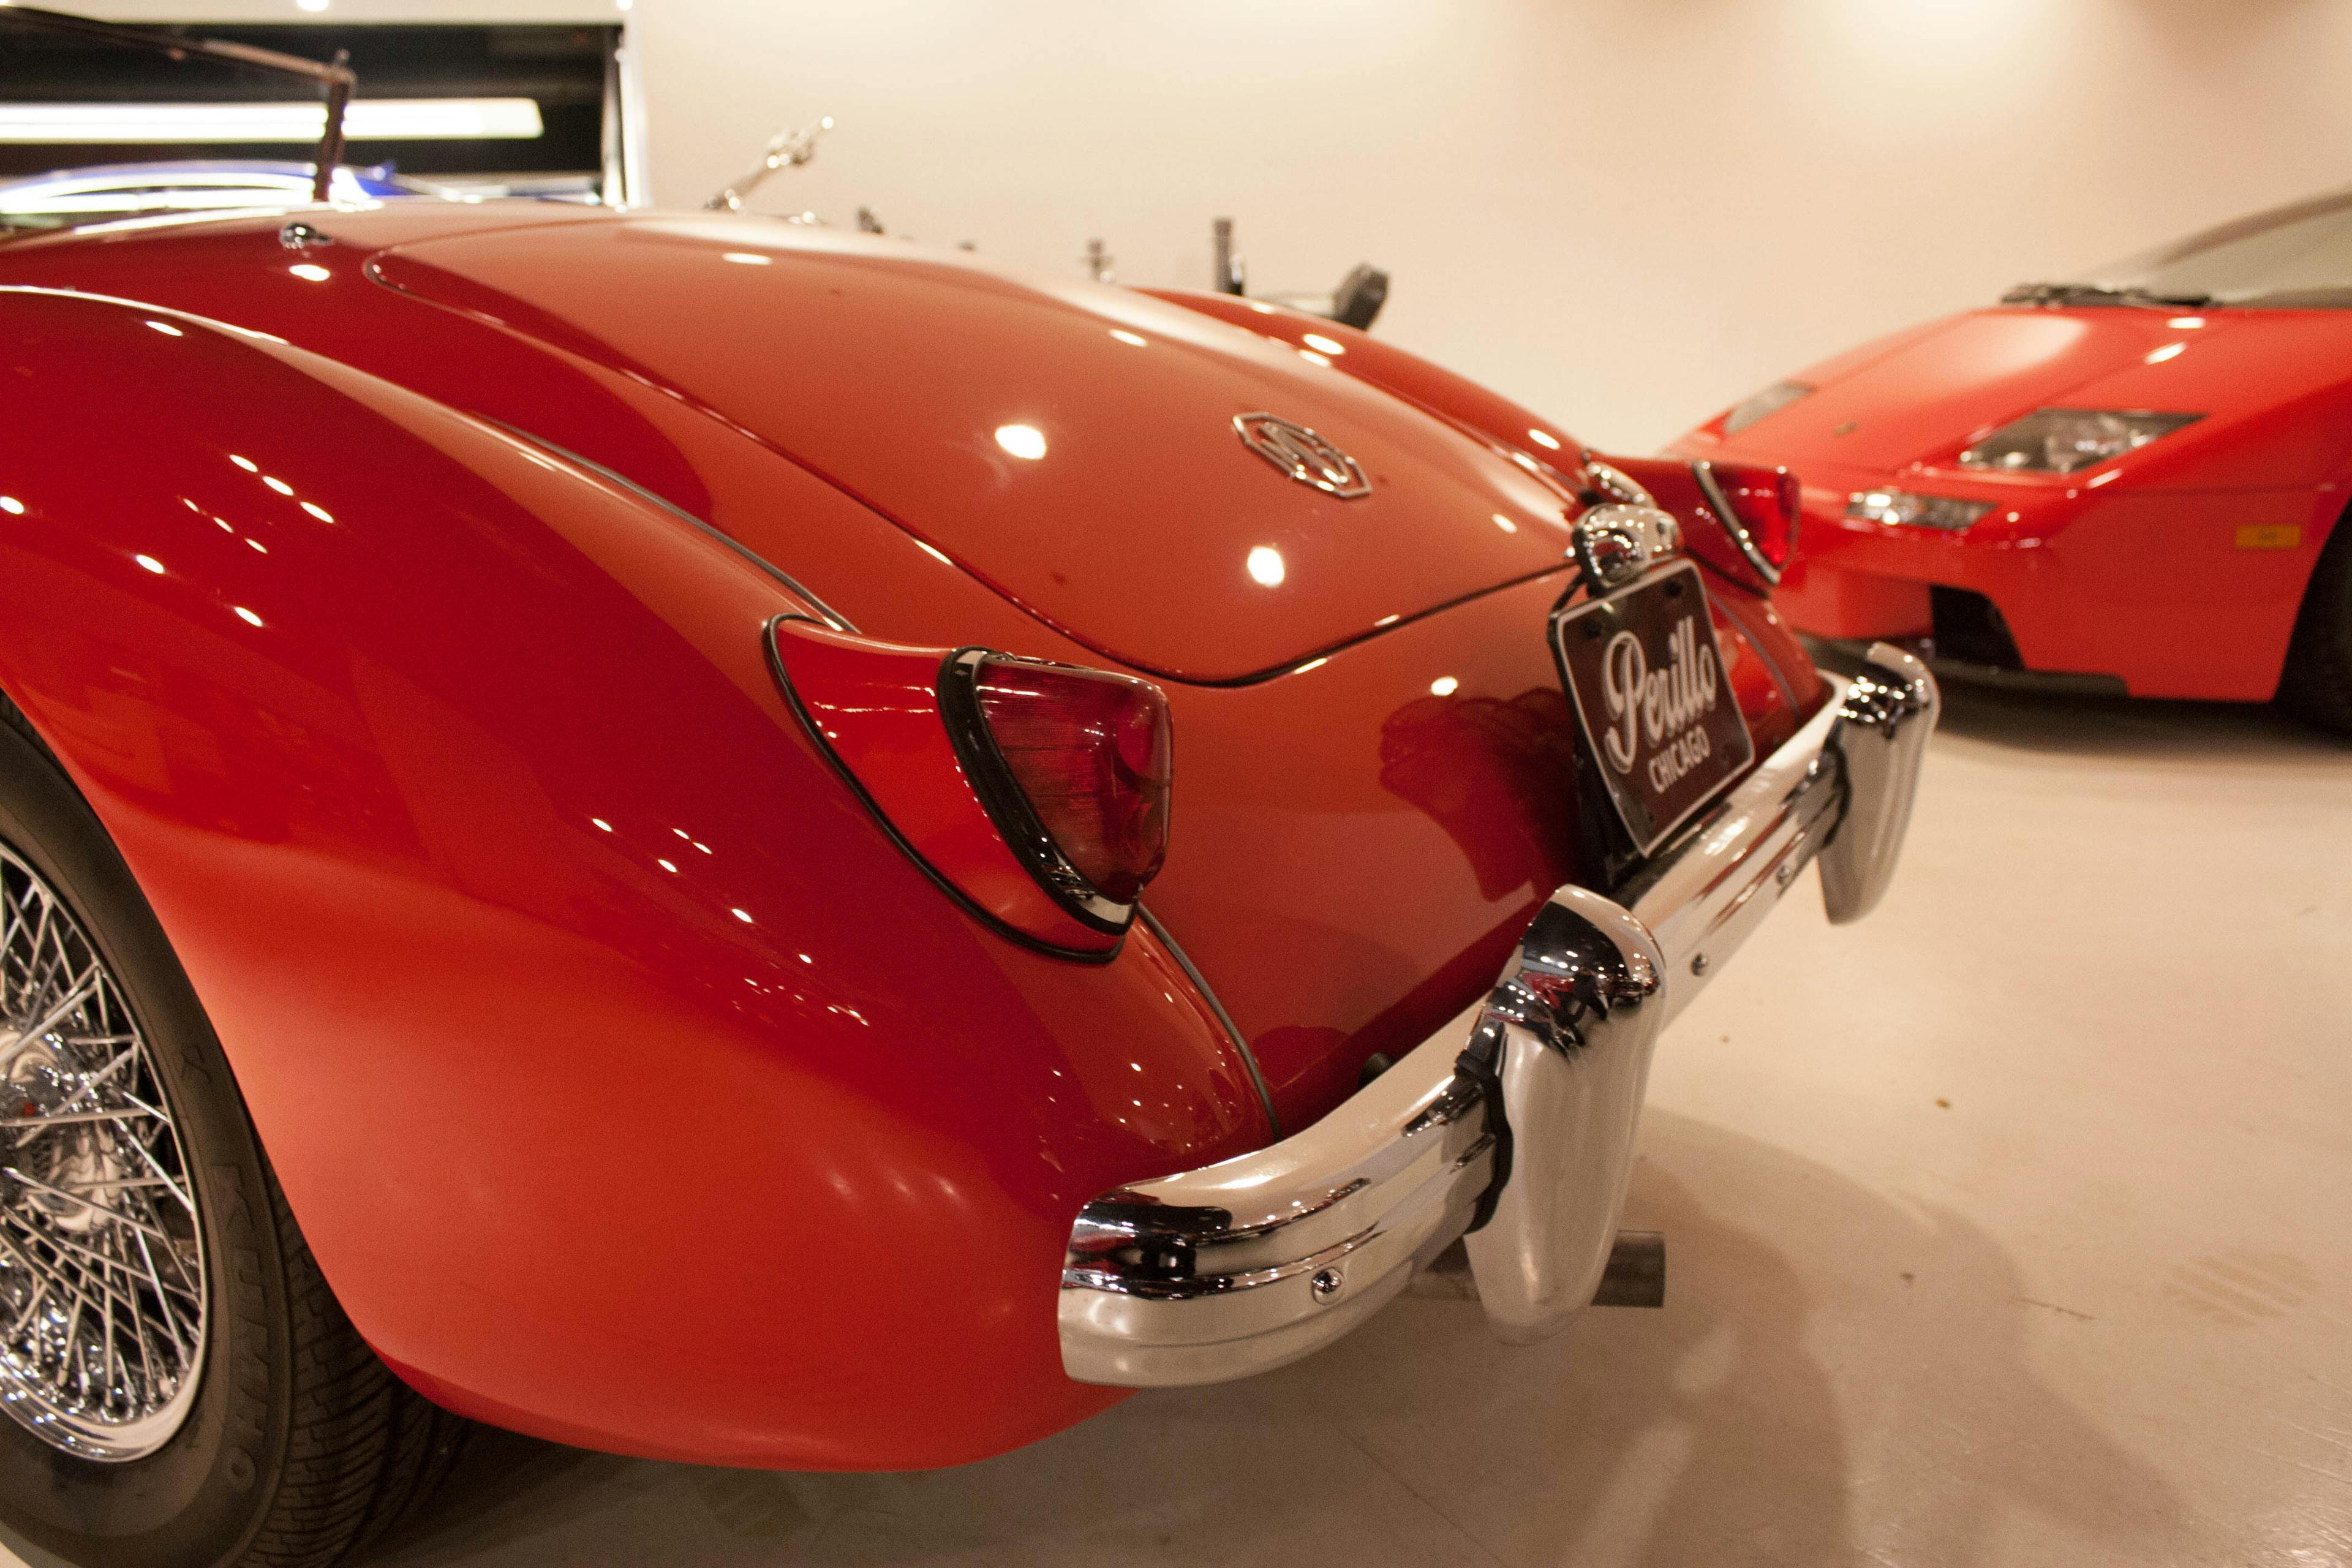 Three-quarter rear view of a mid-20th-century MG MGA automobile at the Perillo dealership in Chicago.